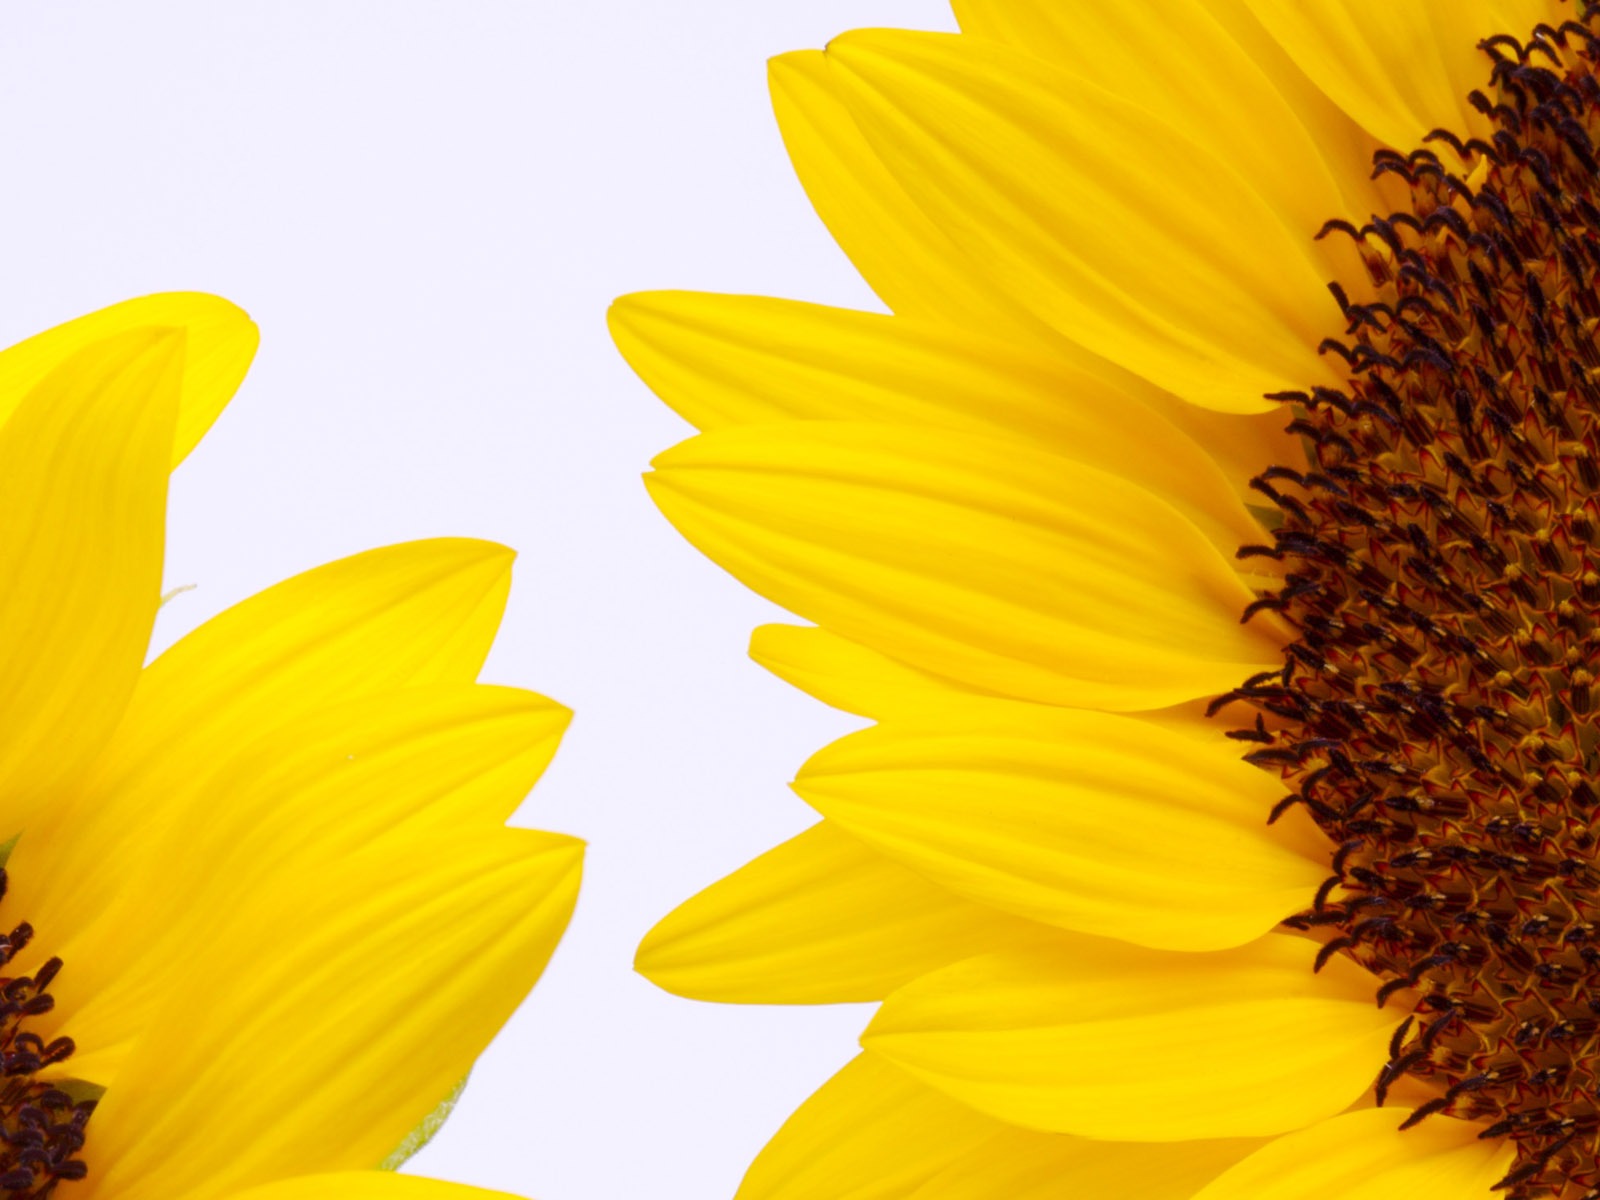 Sunny sunflower photo HD Wallpapers #31 - 1600x1200